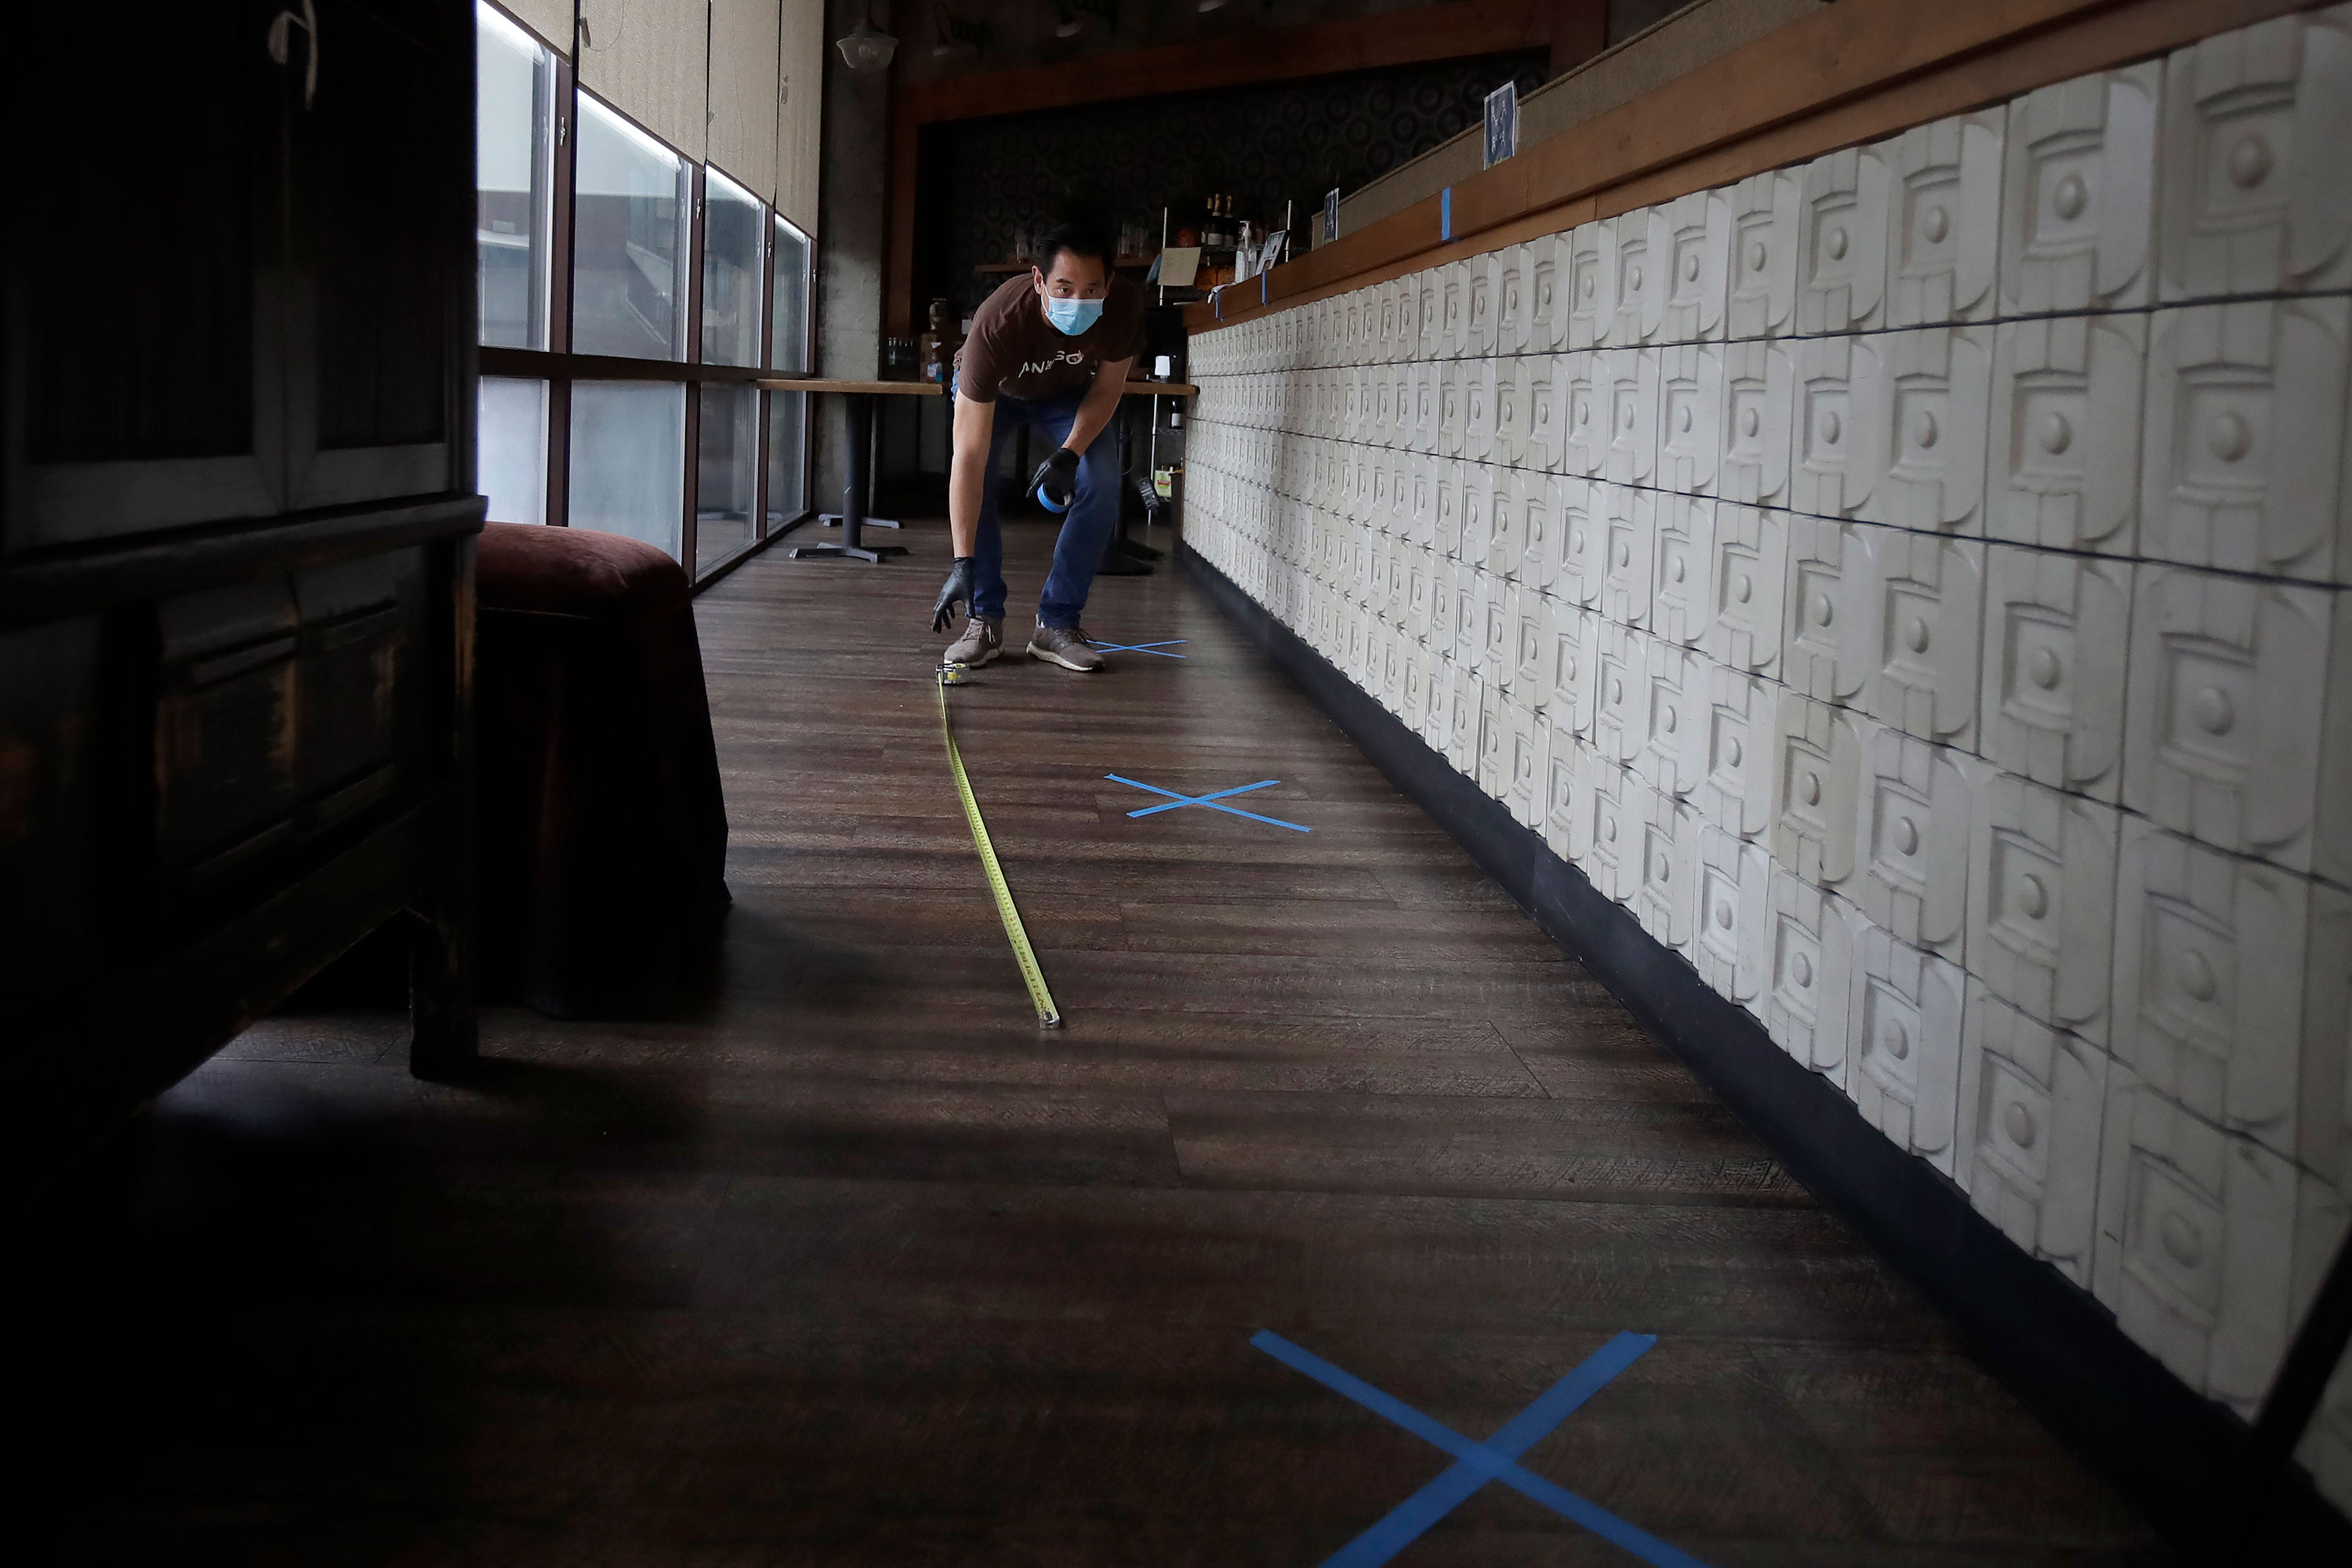 Kenneth Lew, managing member at Crustacean Restaurant, wears a face mask while measuring distance for people to stand while waiting for takeout at the restaurant during the coronavirus outbreak in San Francisco on May 12.